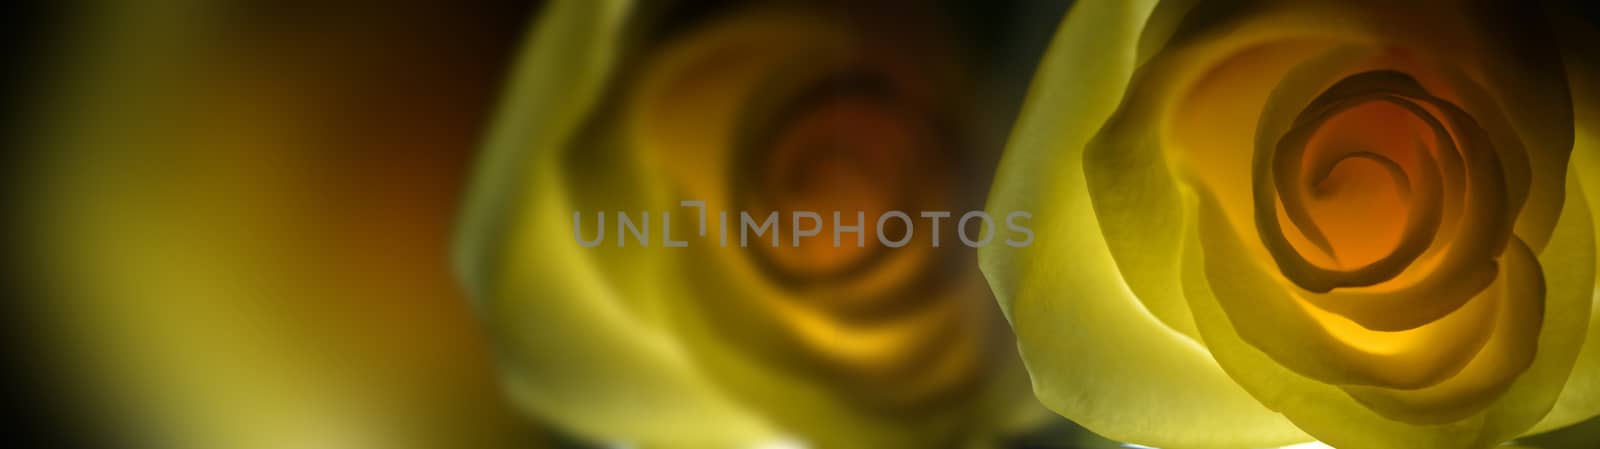 Yellow rose close up over black background